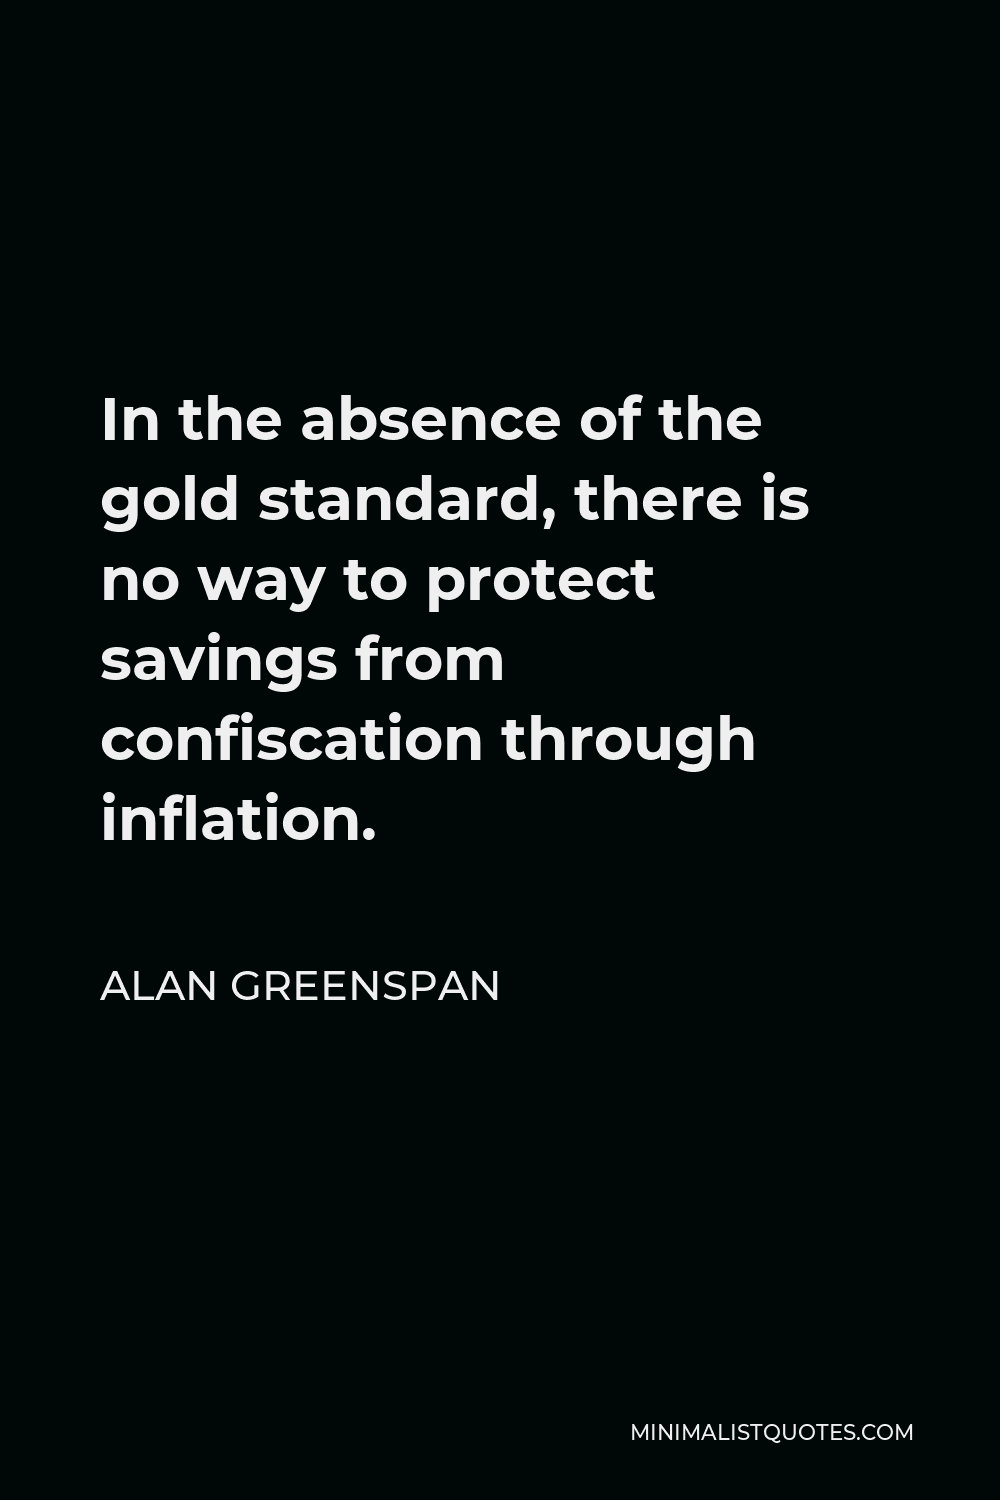 Alan Greenspan Quote - In the absence of the gold standard, there is no way to protect savings from confiscation through inflation. There is no safe store of value.